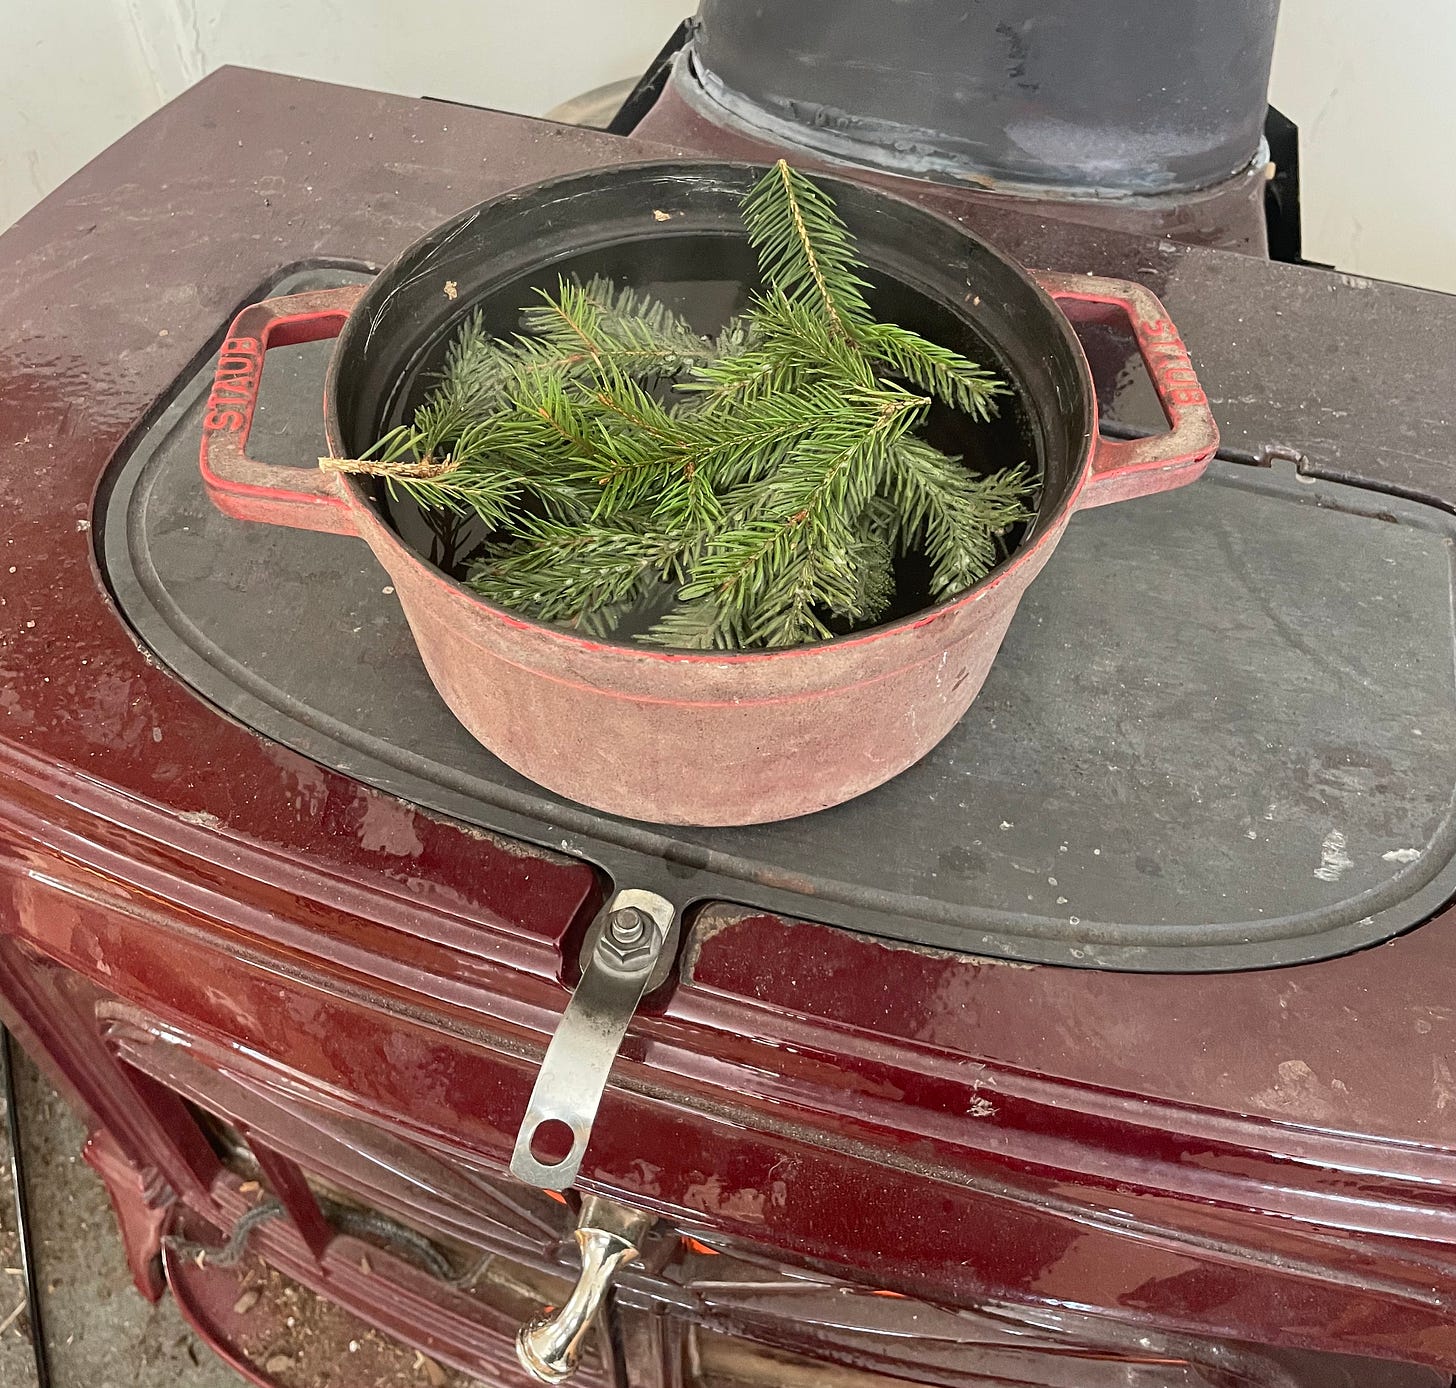 spruce tips in a red pot on a red woodstove